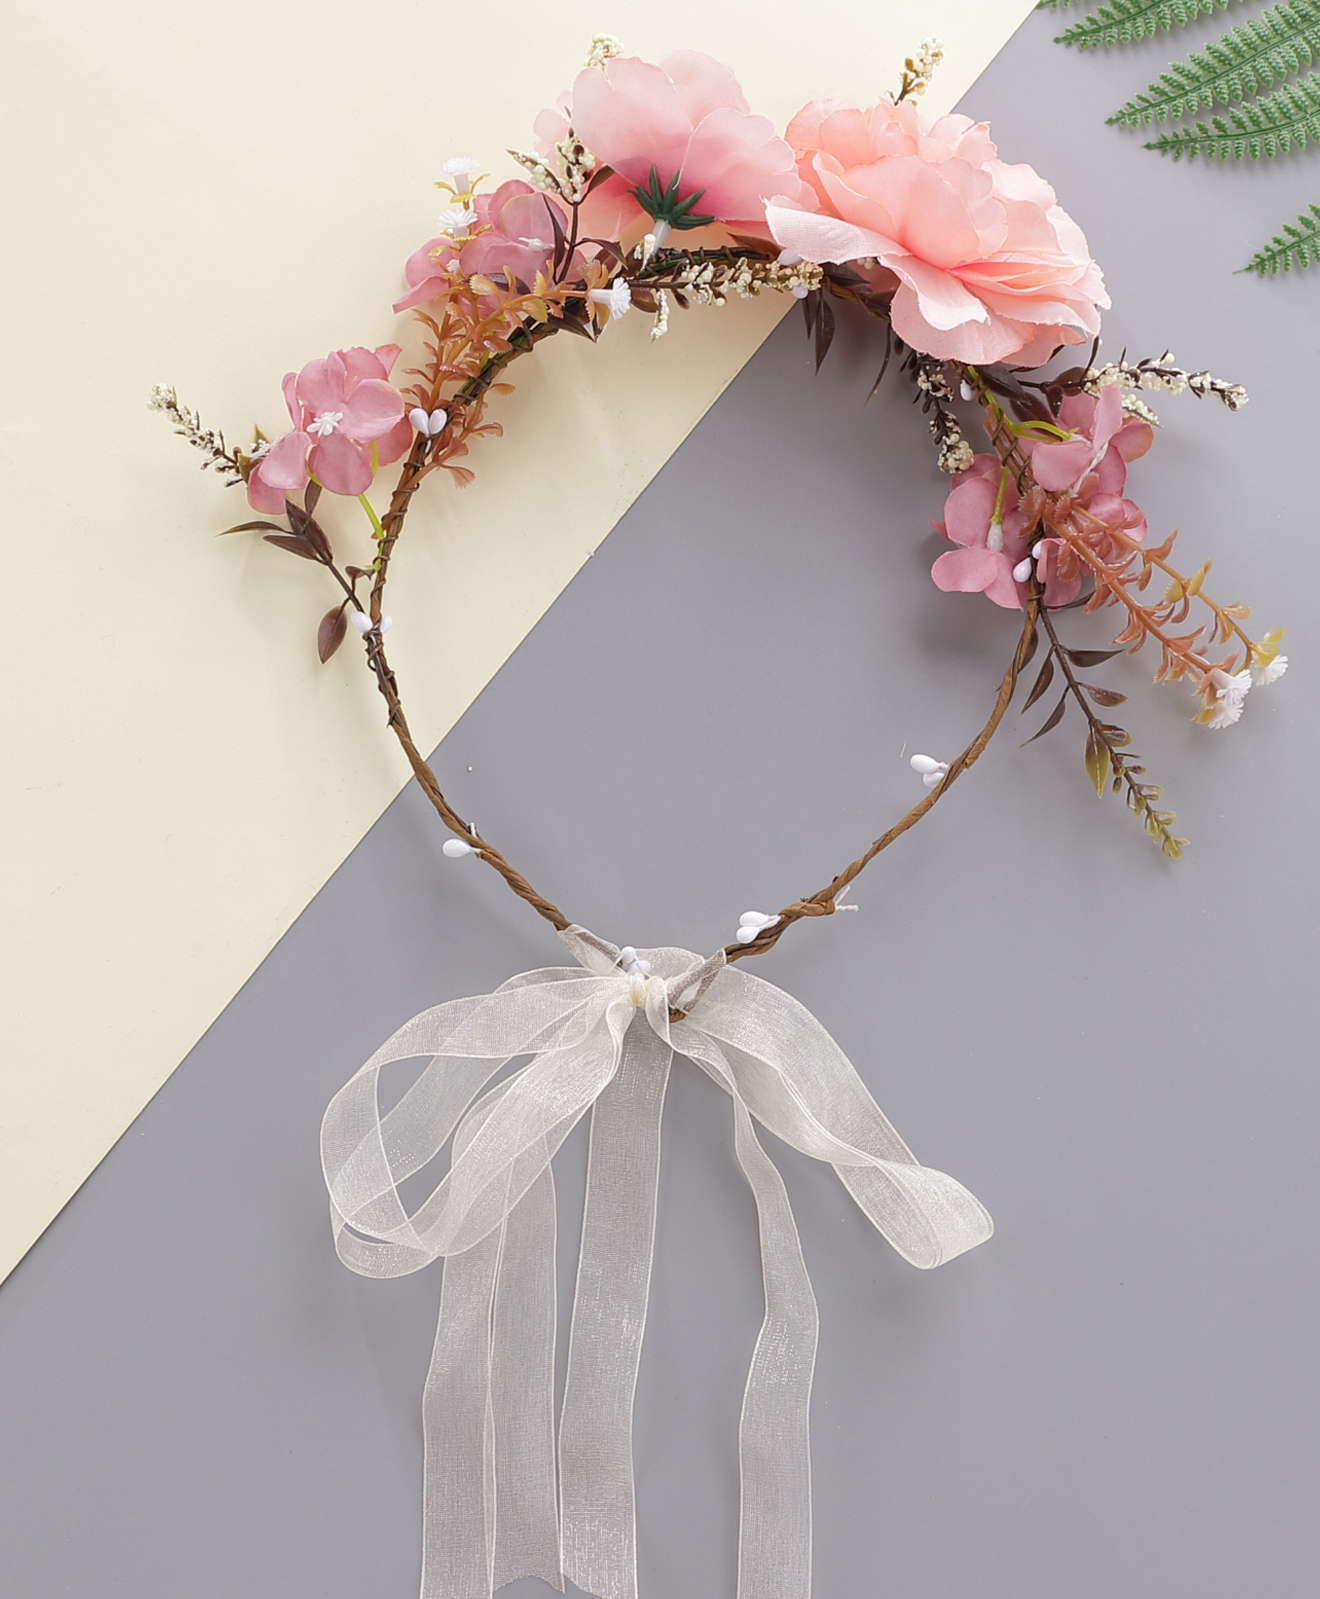 Pine Kids Hair Bands With Floral Tiara - Peach for Girls (3-12 Years) Online  in India, Buy at  - 10682607